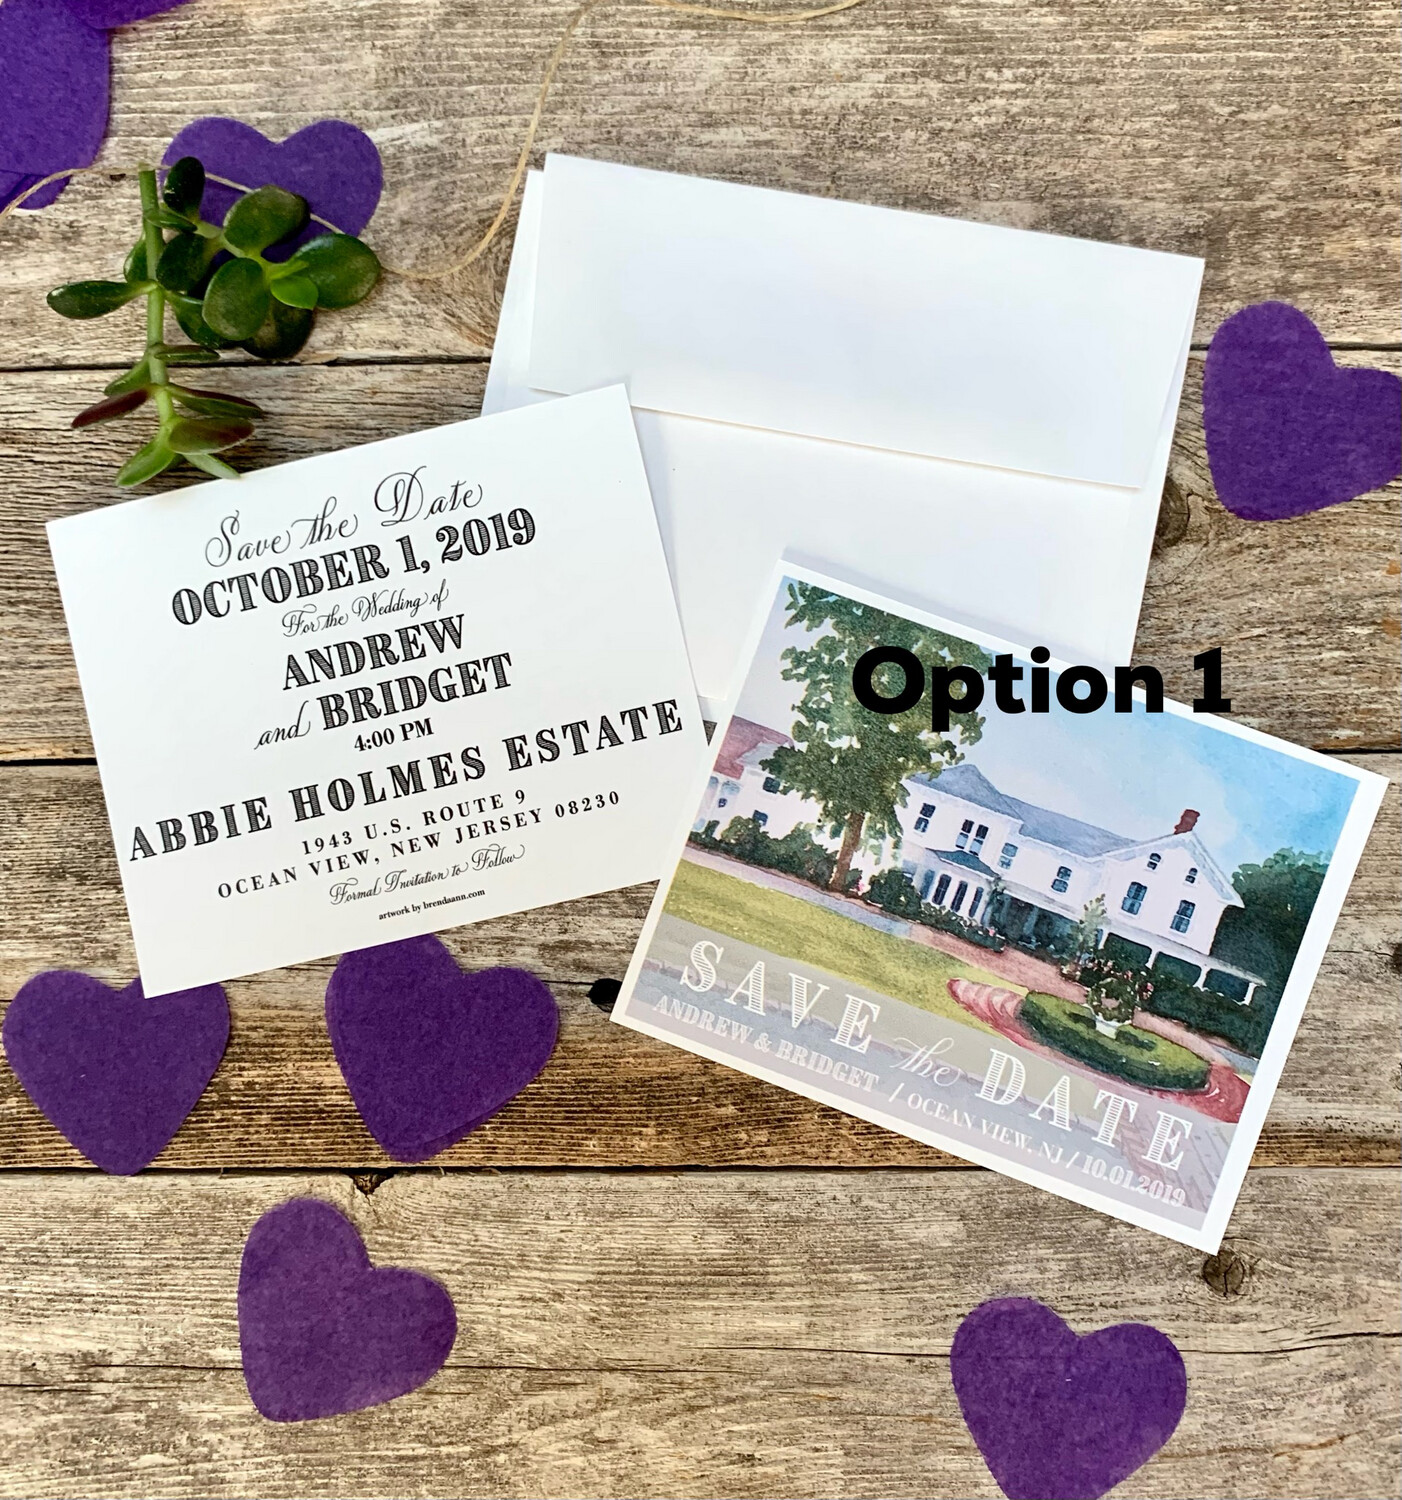 Abbie Holmes Estate Ocean View NJ Watercolor Wedding Save the Date Cards